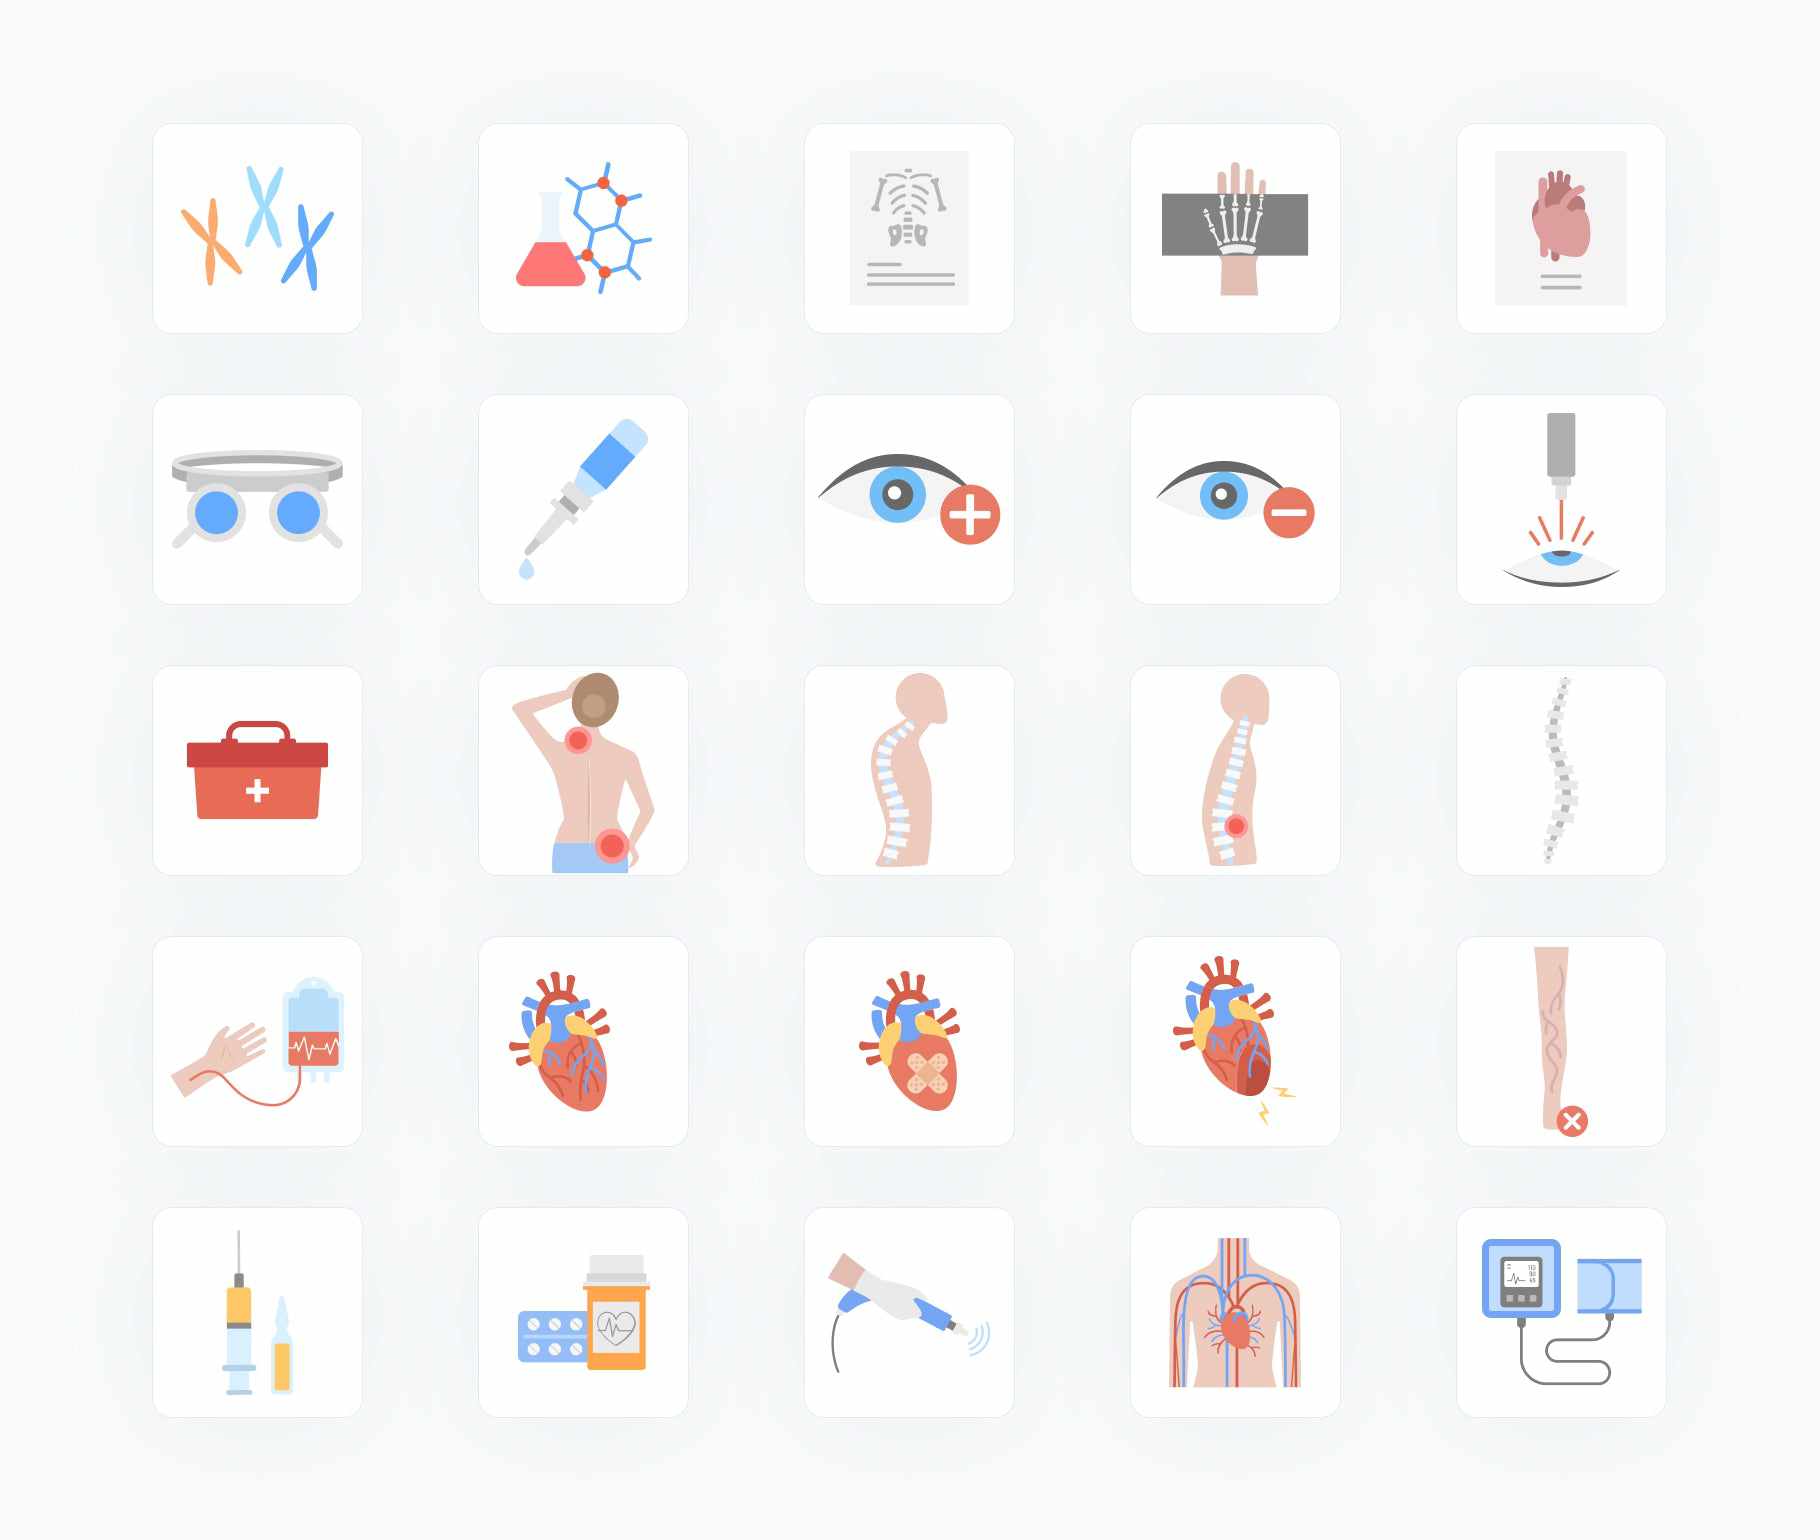 Medicine-Flat-Vector-Icons Icons Medicine Flat Vector Icons S01192203 powerpoint-template keynote-template google-slides-template infographic-template